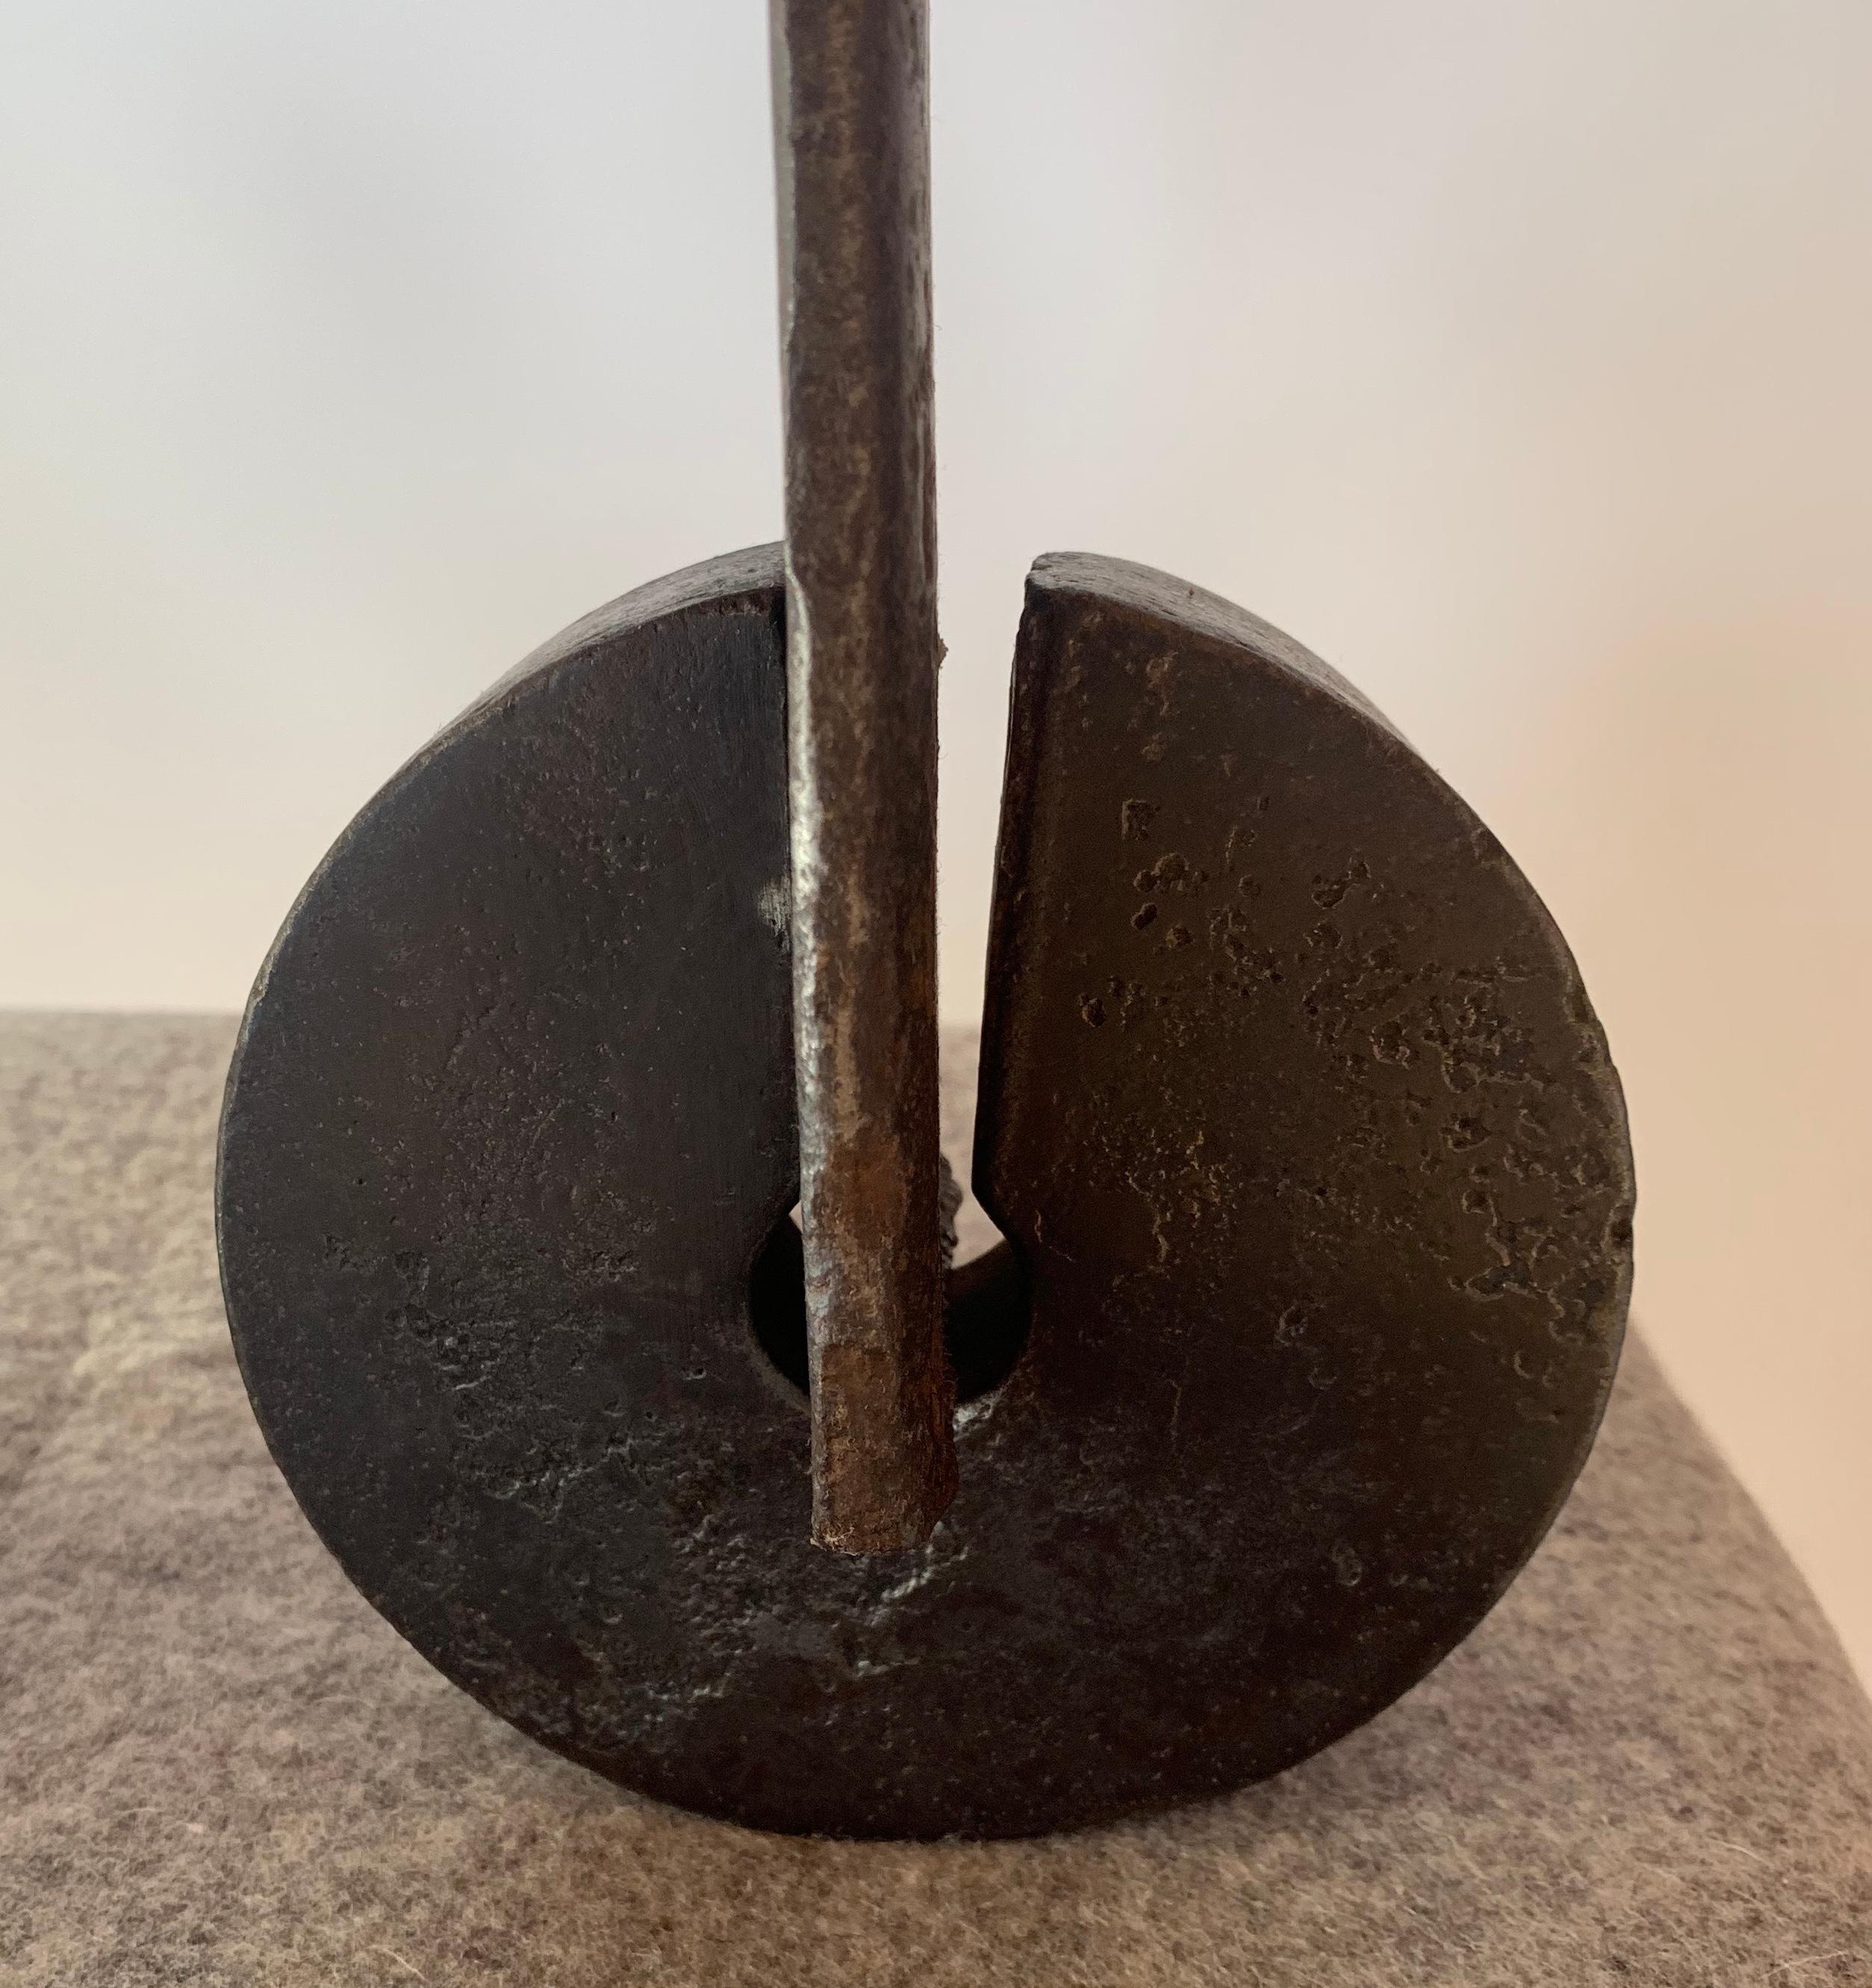 Tortoise
welded steel
Measures: 4 x 10 x 17 in.

Artist statement:

I seldom use stock material, but prefer distressed and rusted steel that has been scarred, bent, and made imperfect. In this state, the material becomes quite beautiful. There